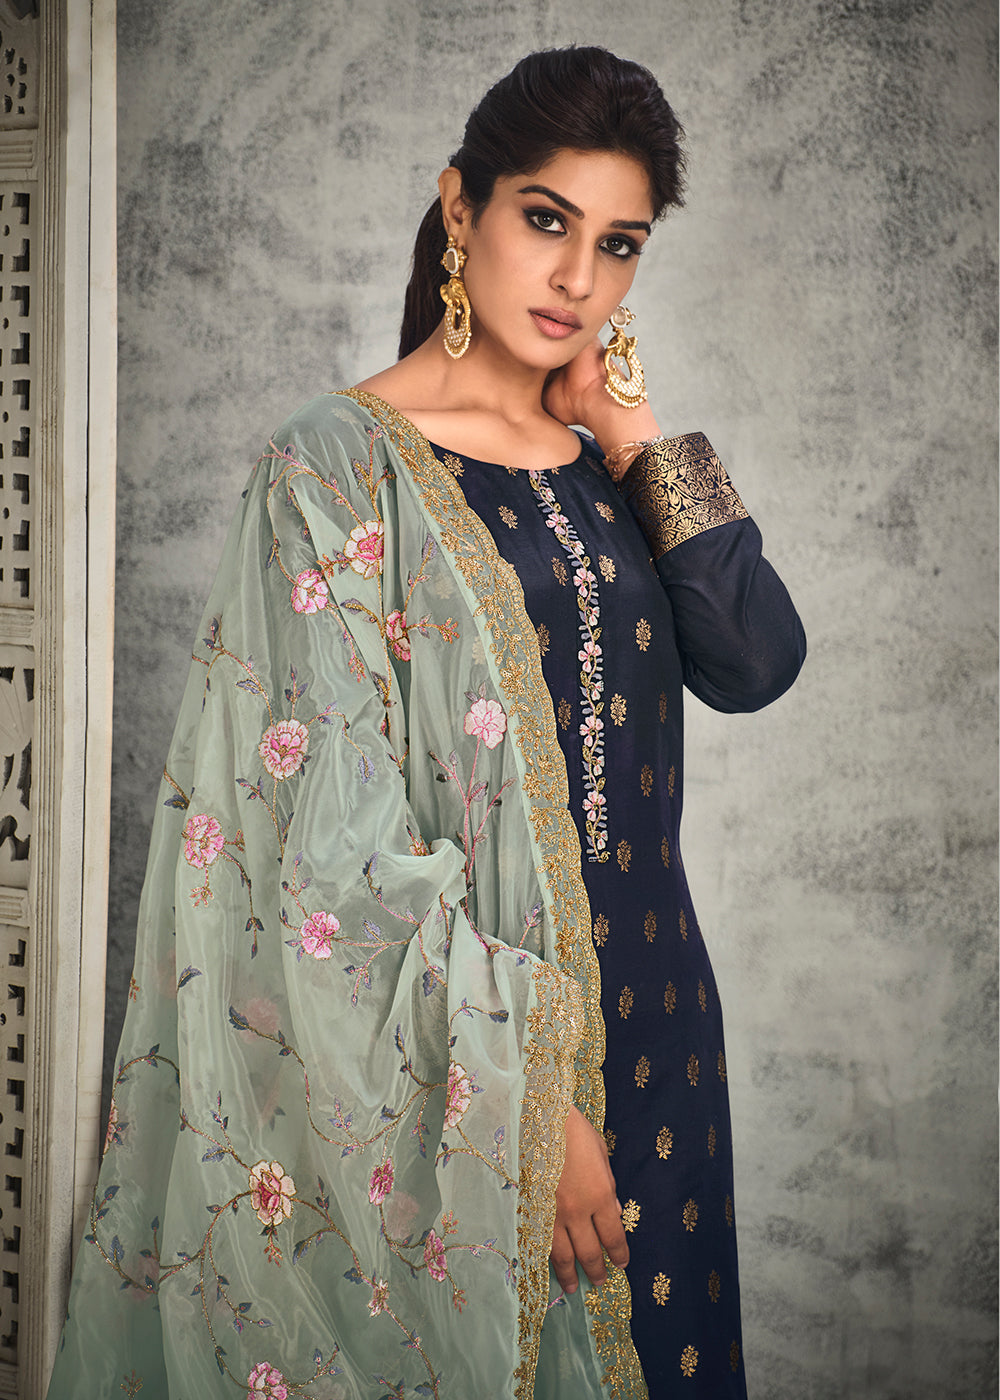 Buy Now Jacquard Silk Adorning Blue Pakistani Style Suit Online in USA, UK, Canada & Worldwide at Empress Clothing.